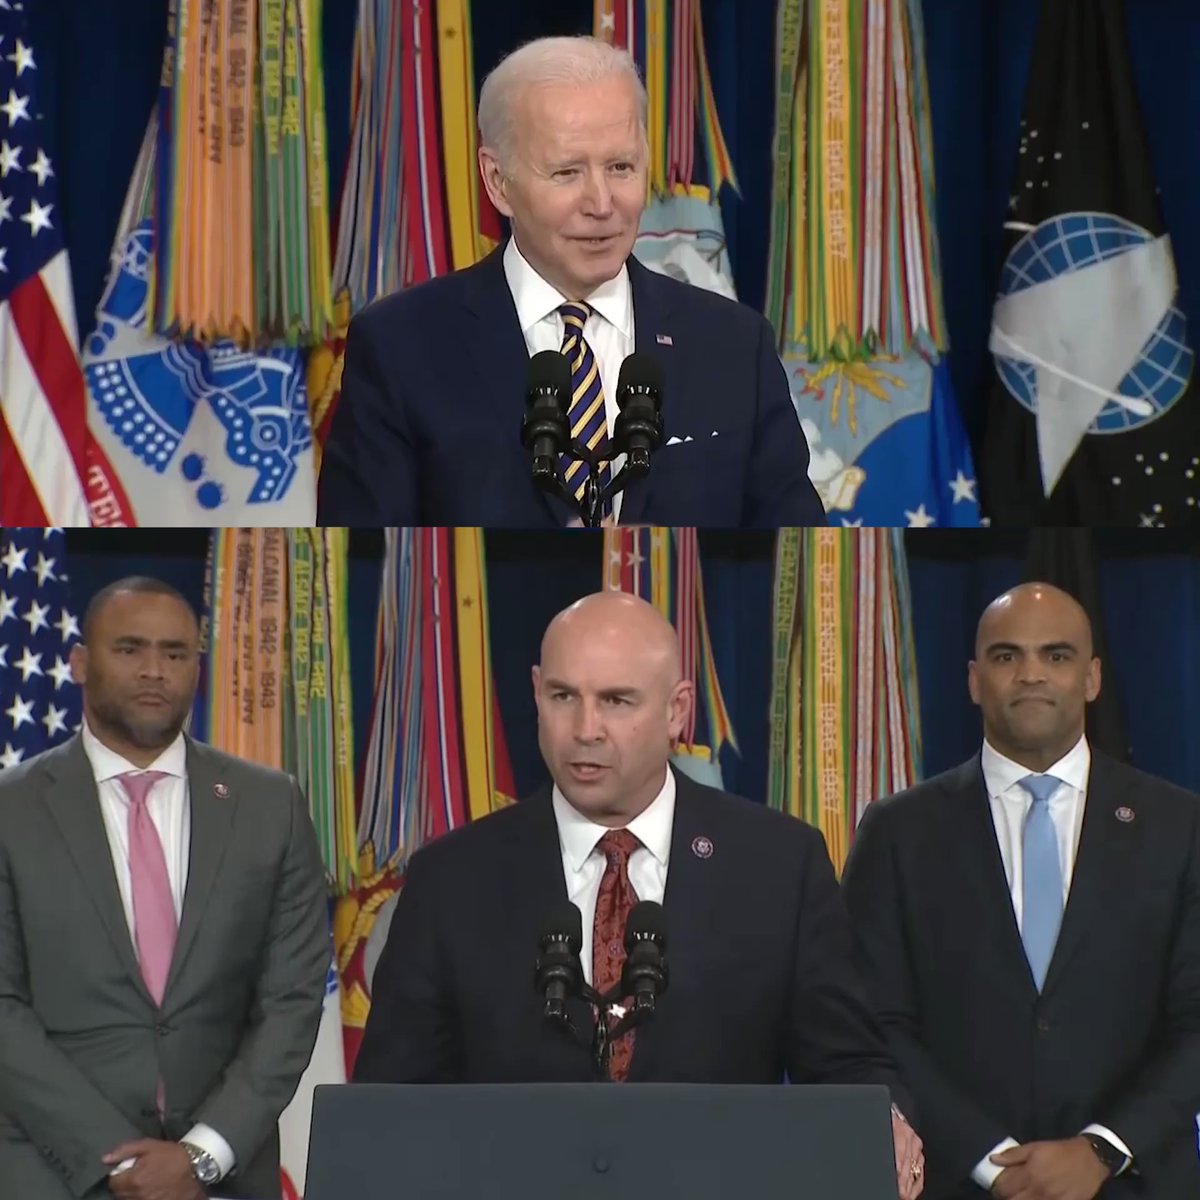 High Quality Biden gaffes with 2 black guys and 1 tan guy Blank Meme Template